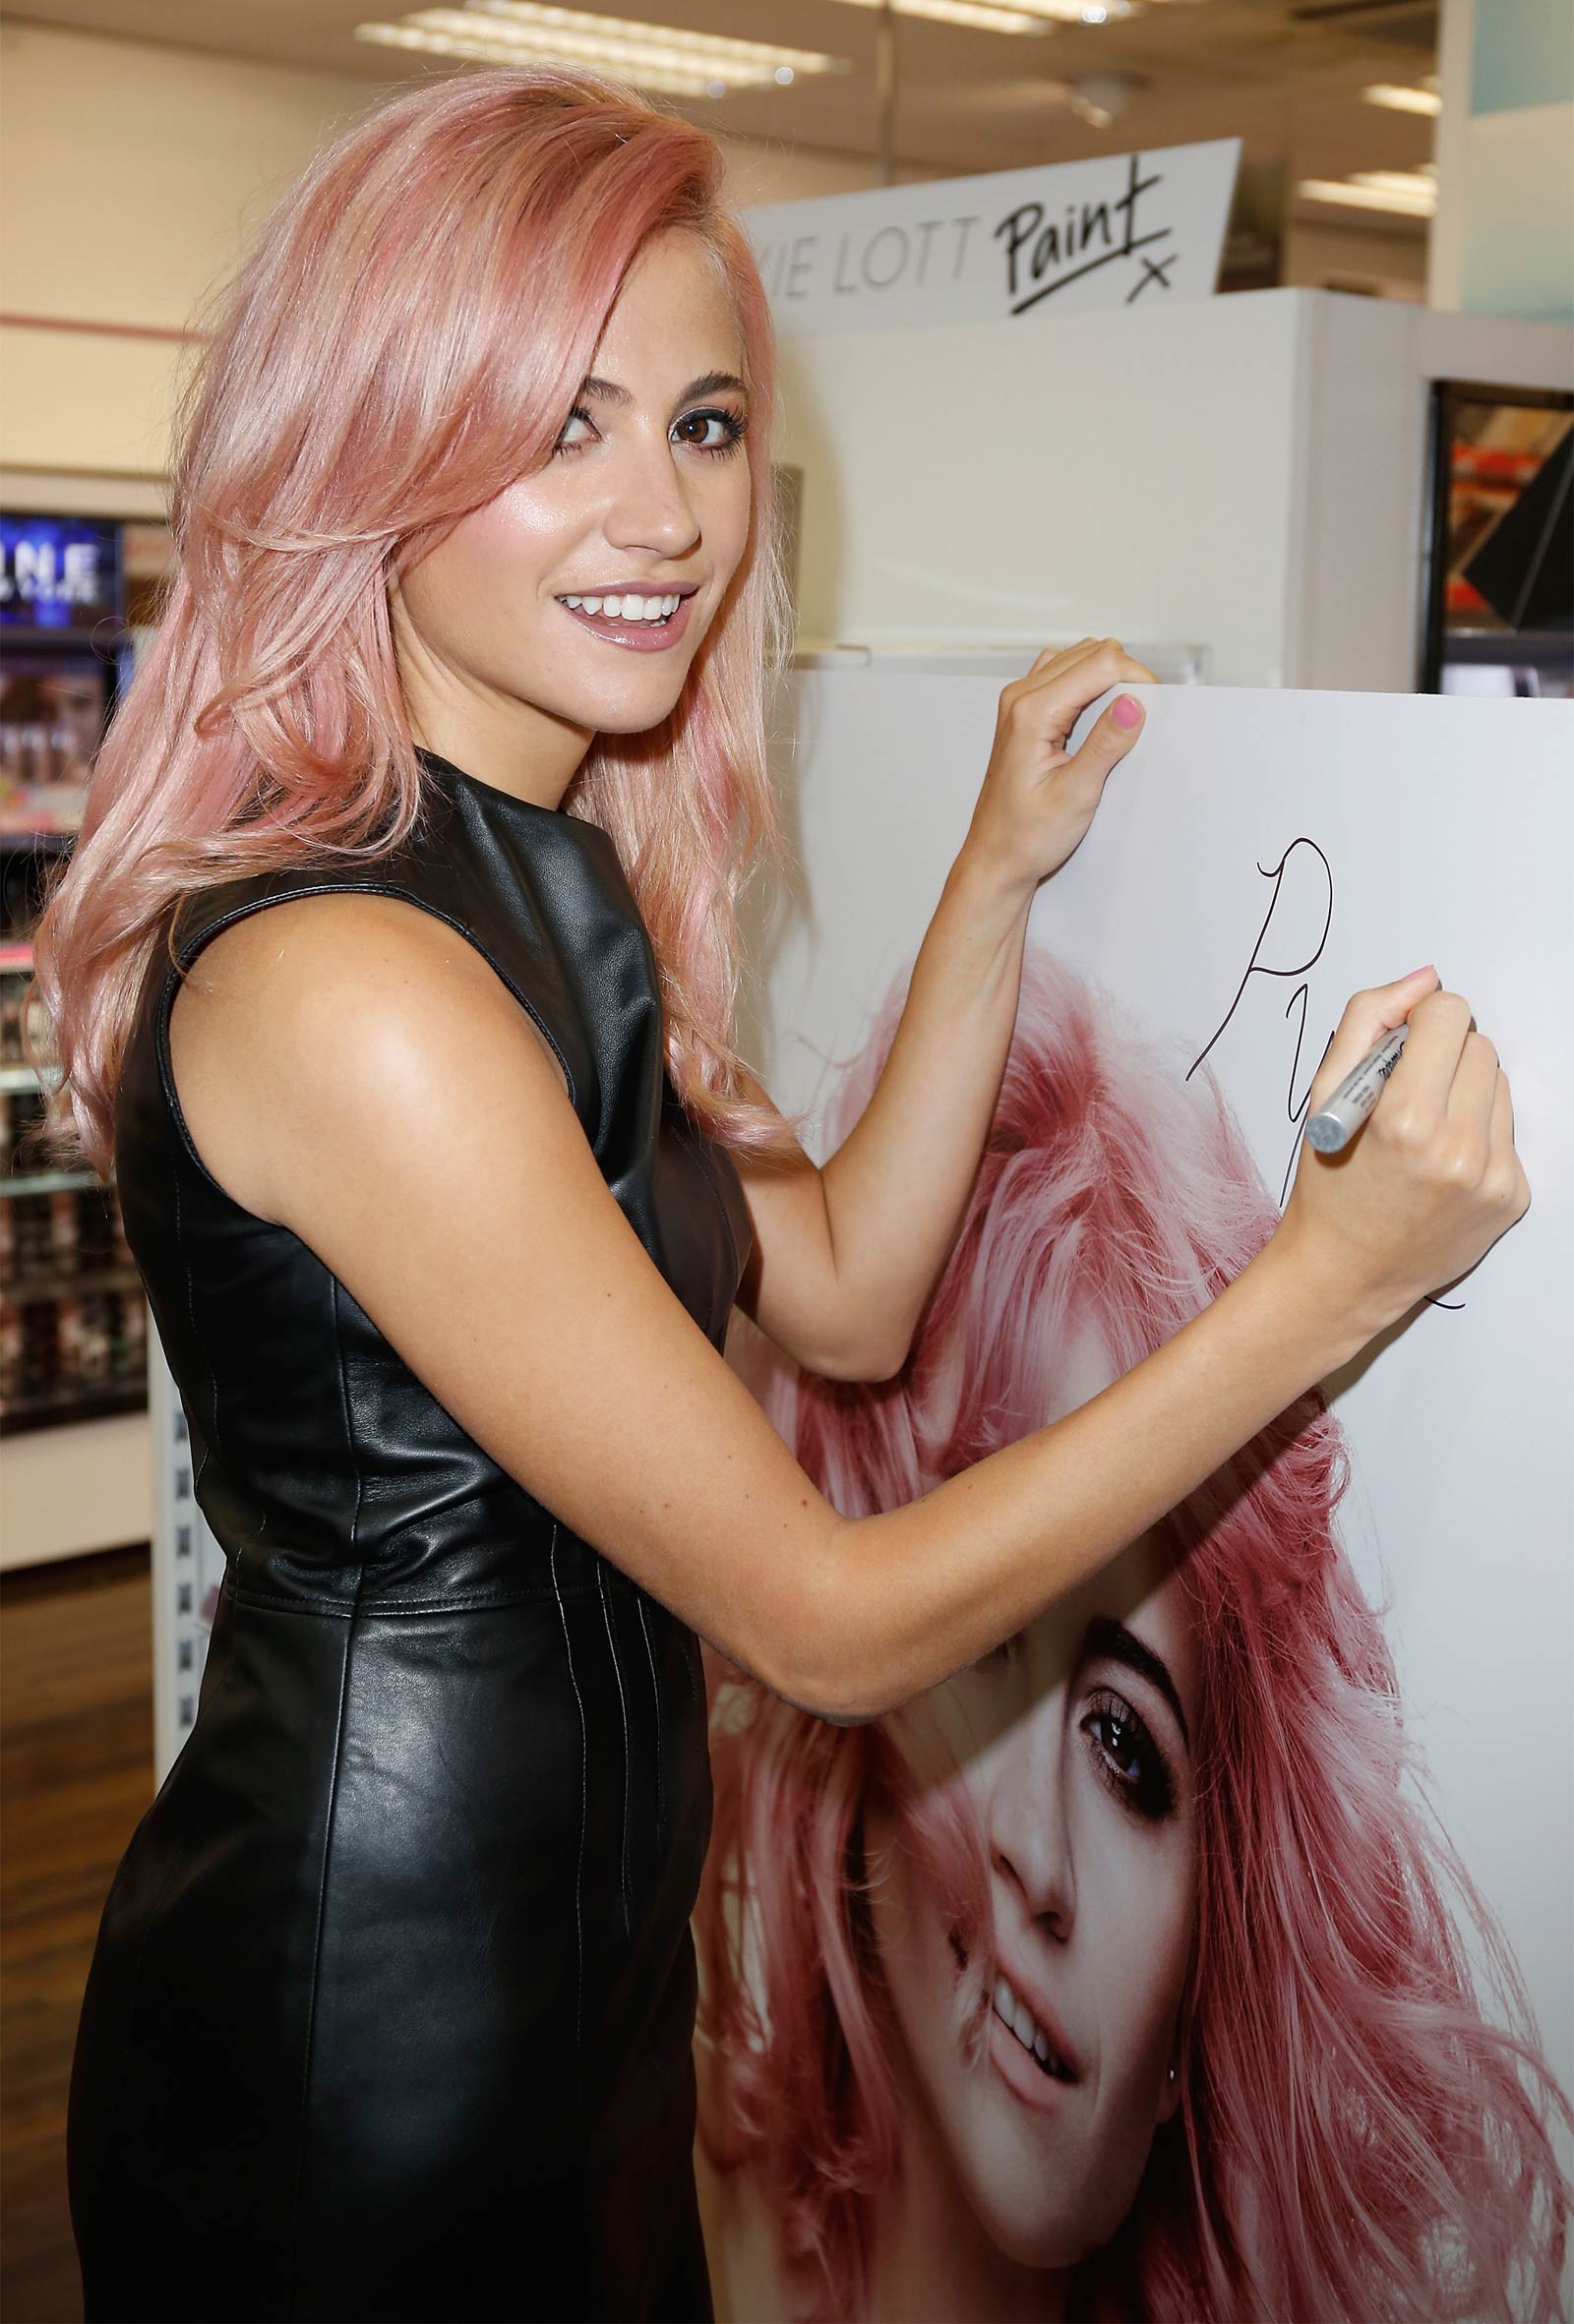 Pixie Lott attends Launch of new hair product range